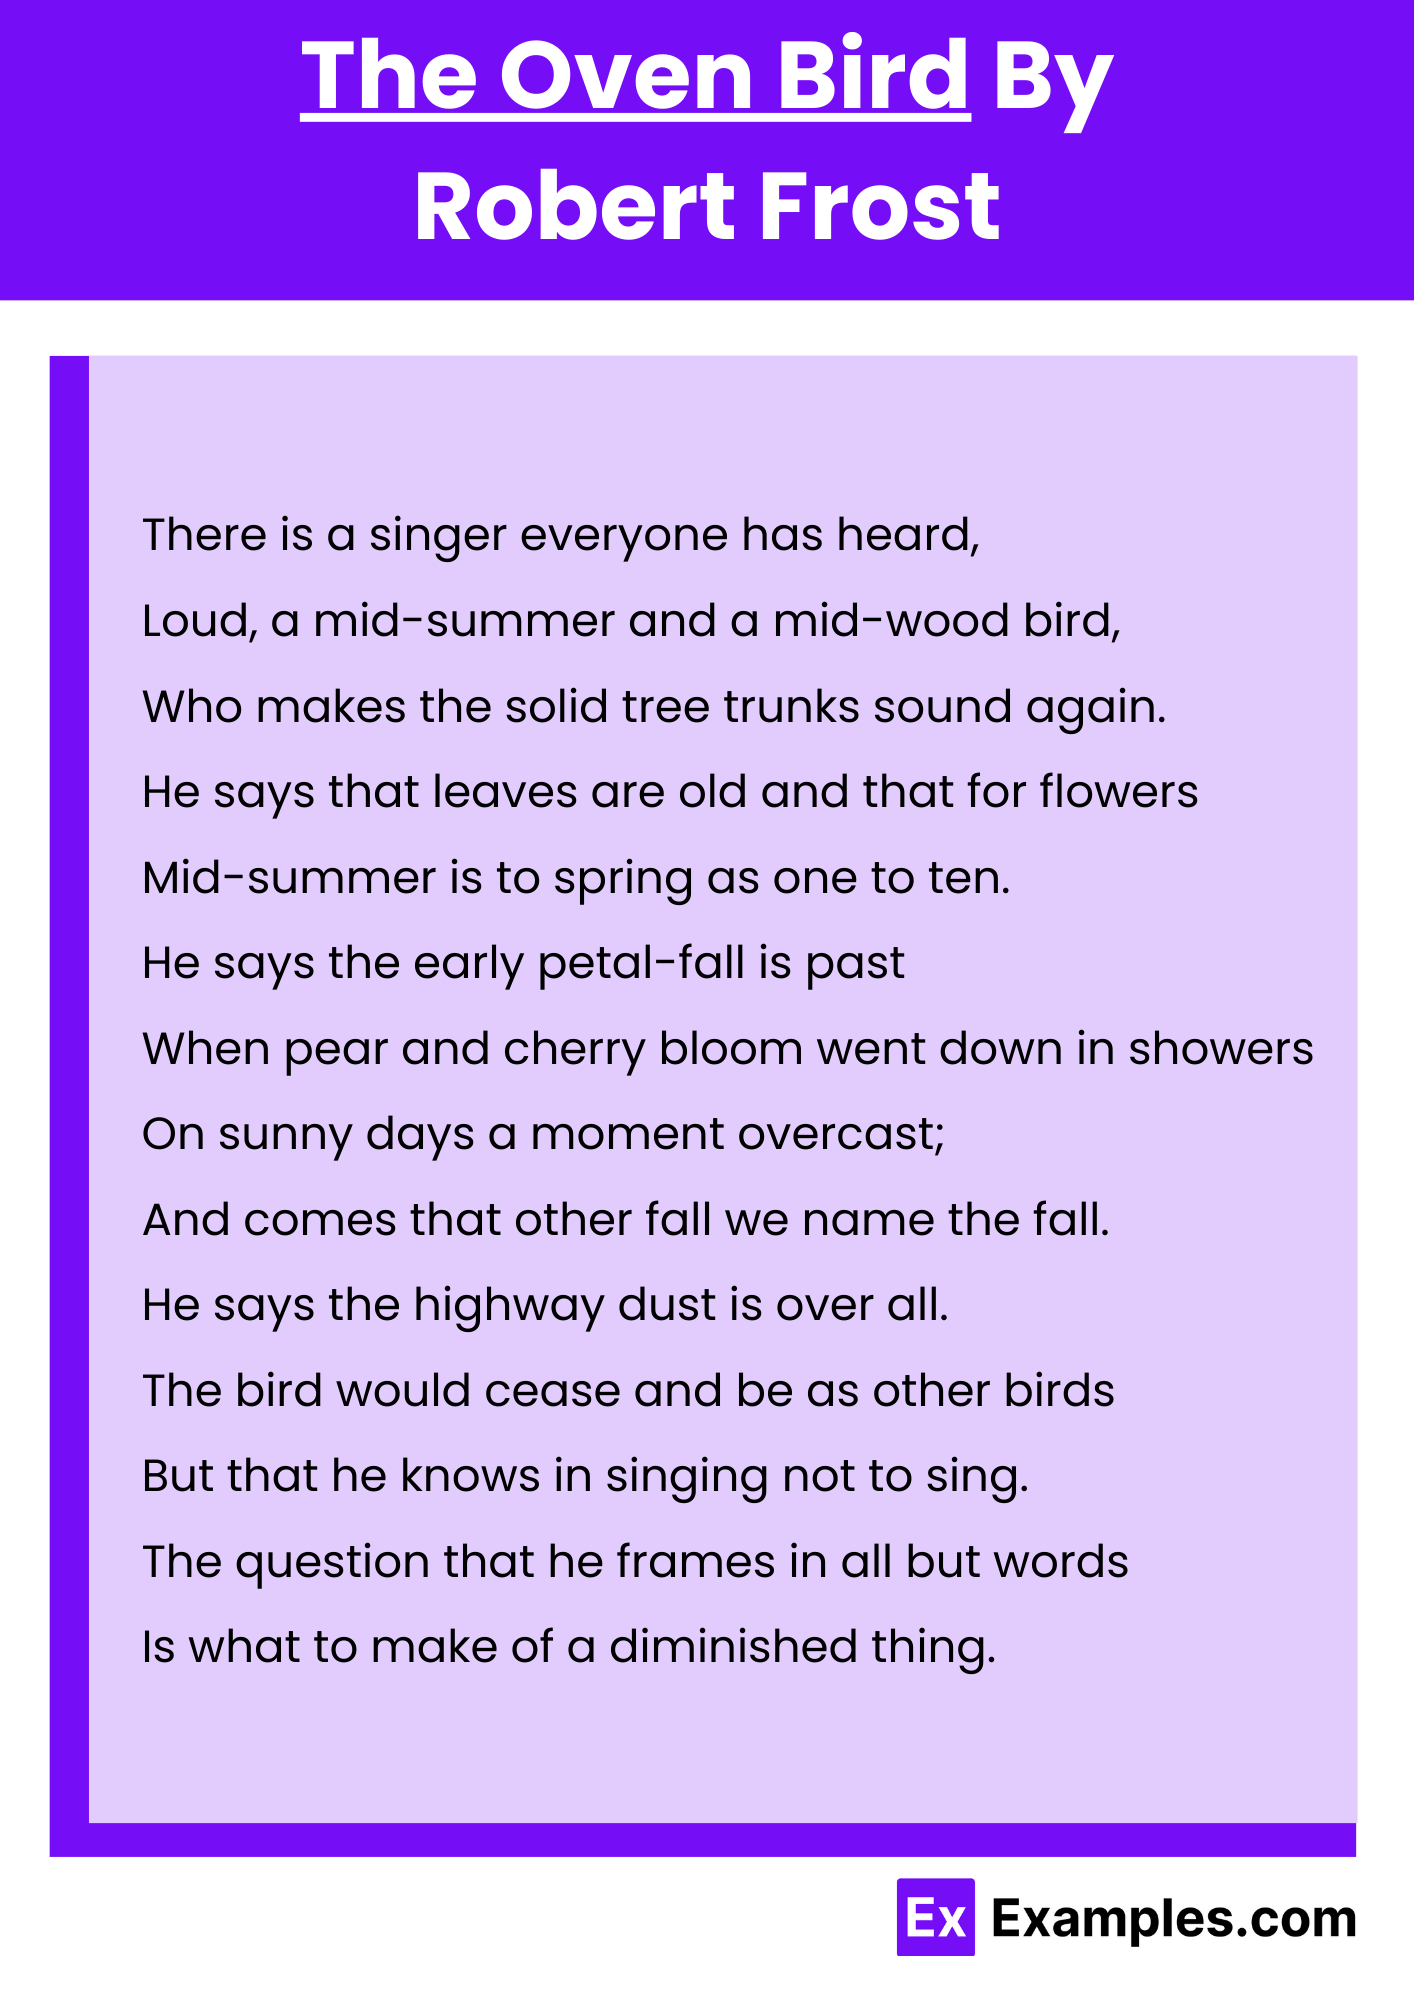 The Oven Bird By Robert Frost